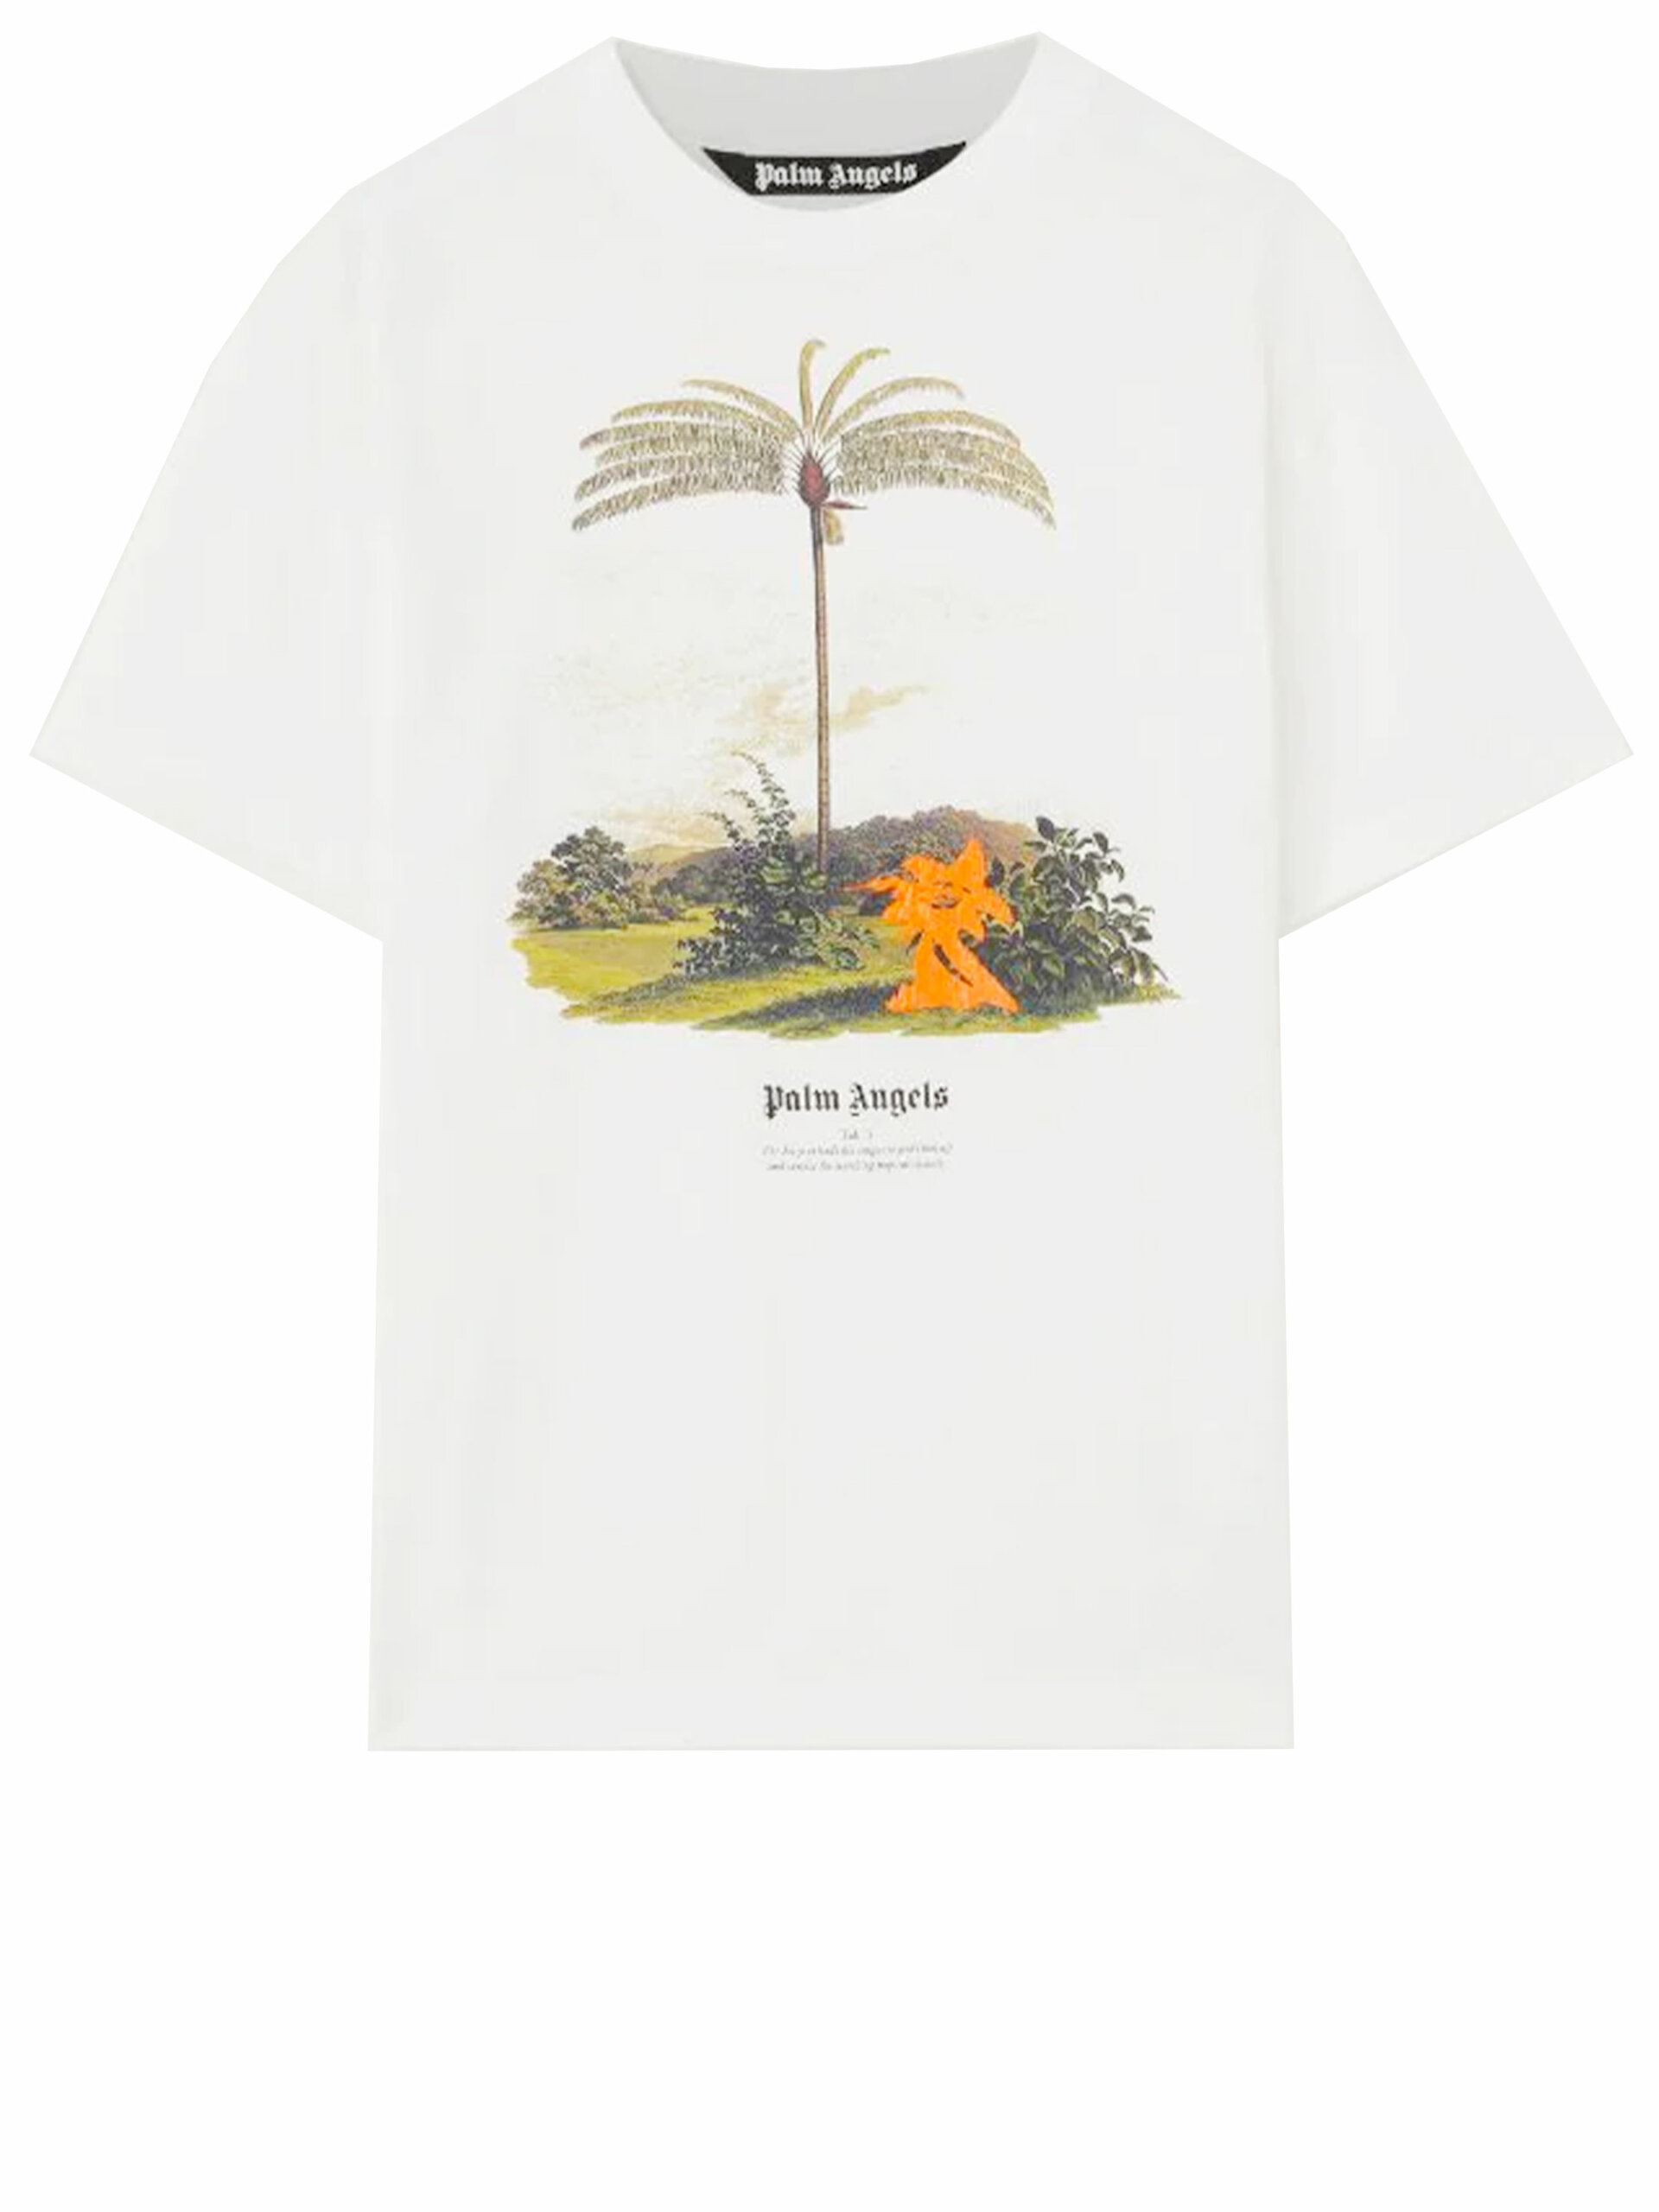 Enzo From The Tropics t-shirt